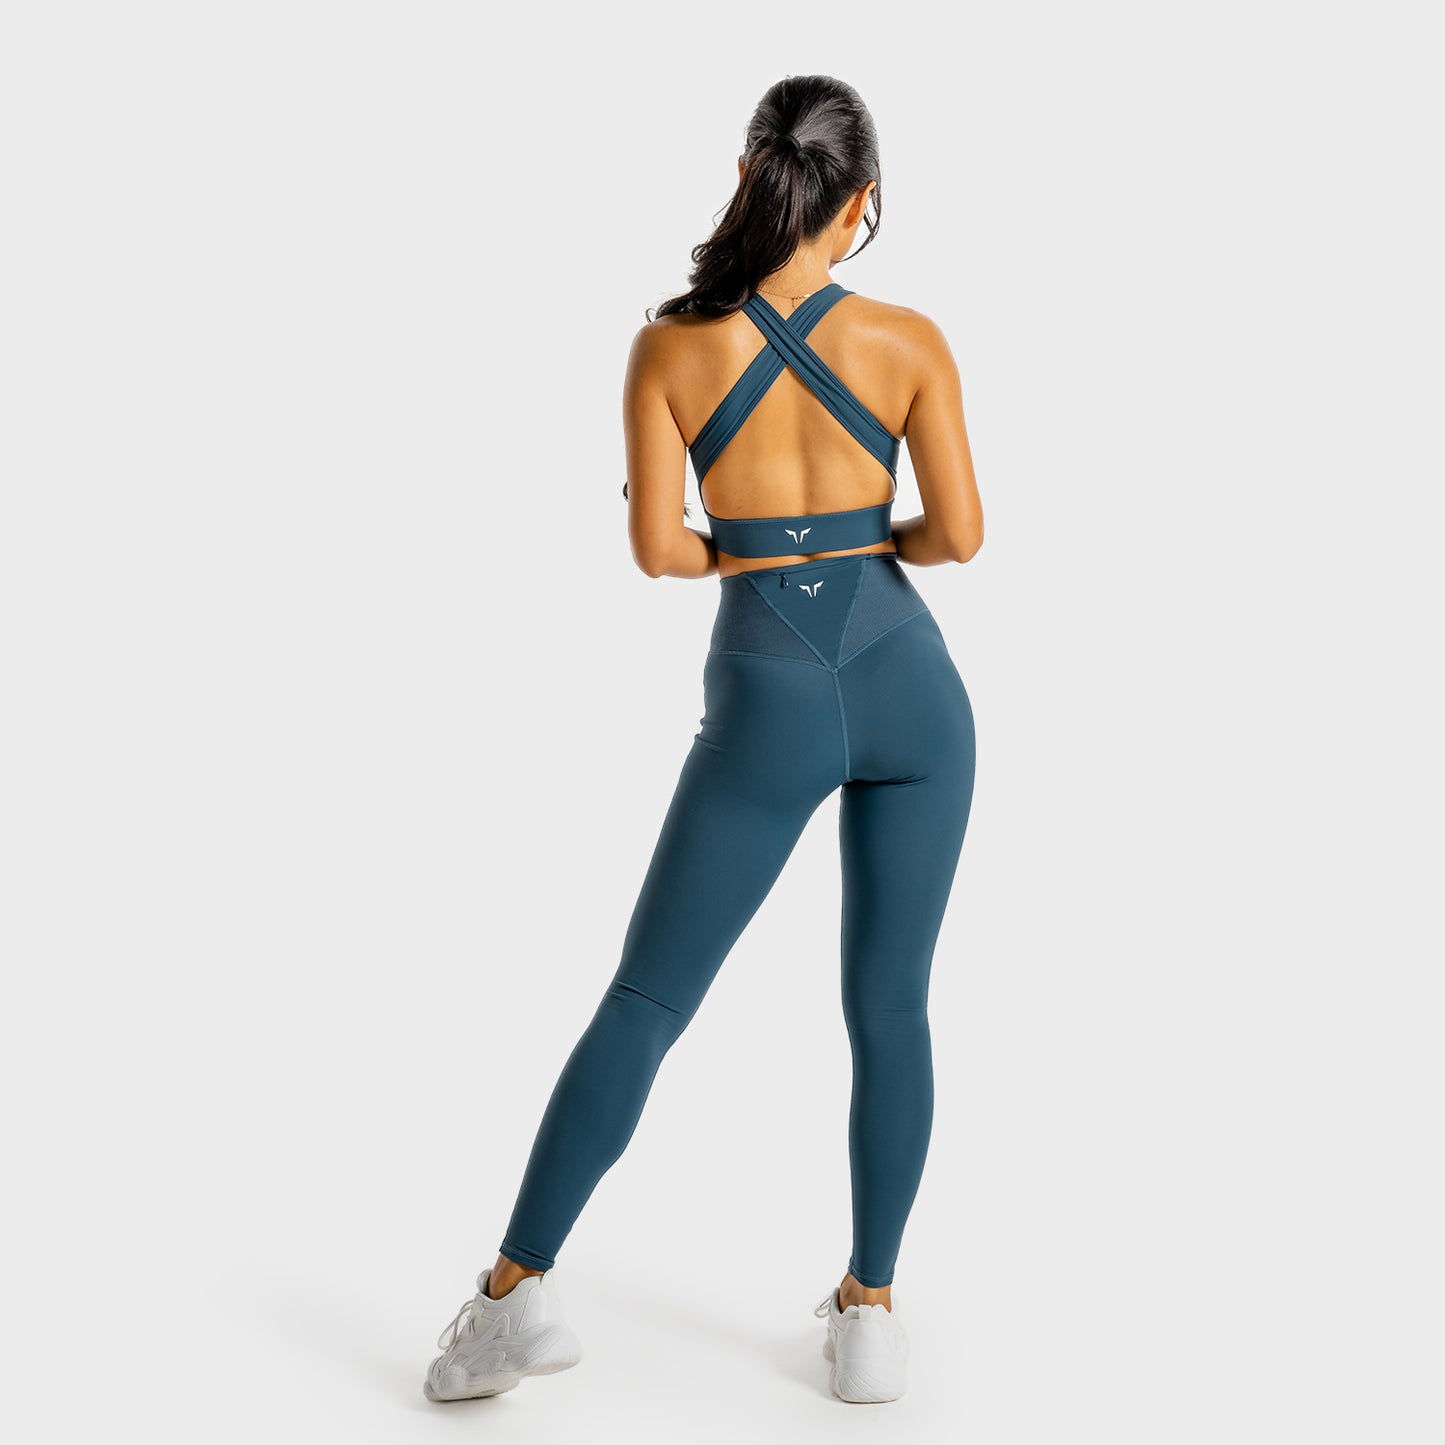 squatwolf-workout-clothes-core-bra-blue-sports-bra-for-gym